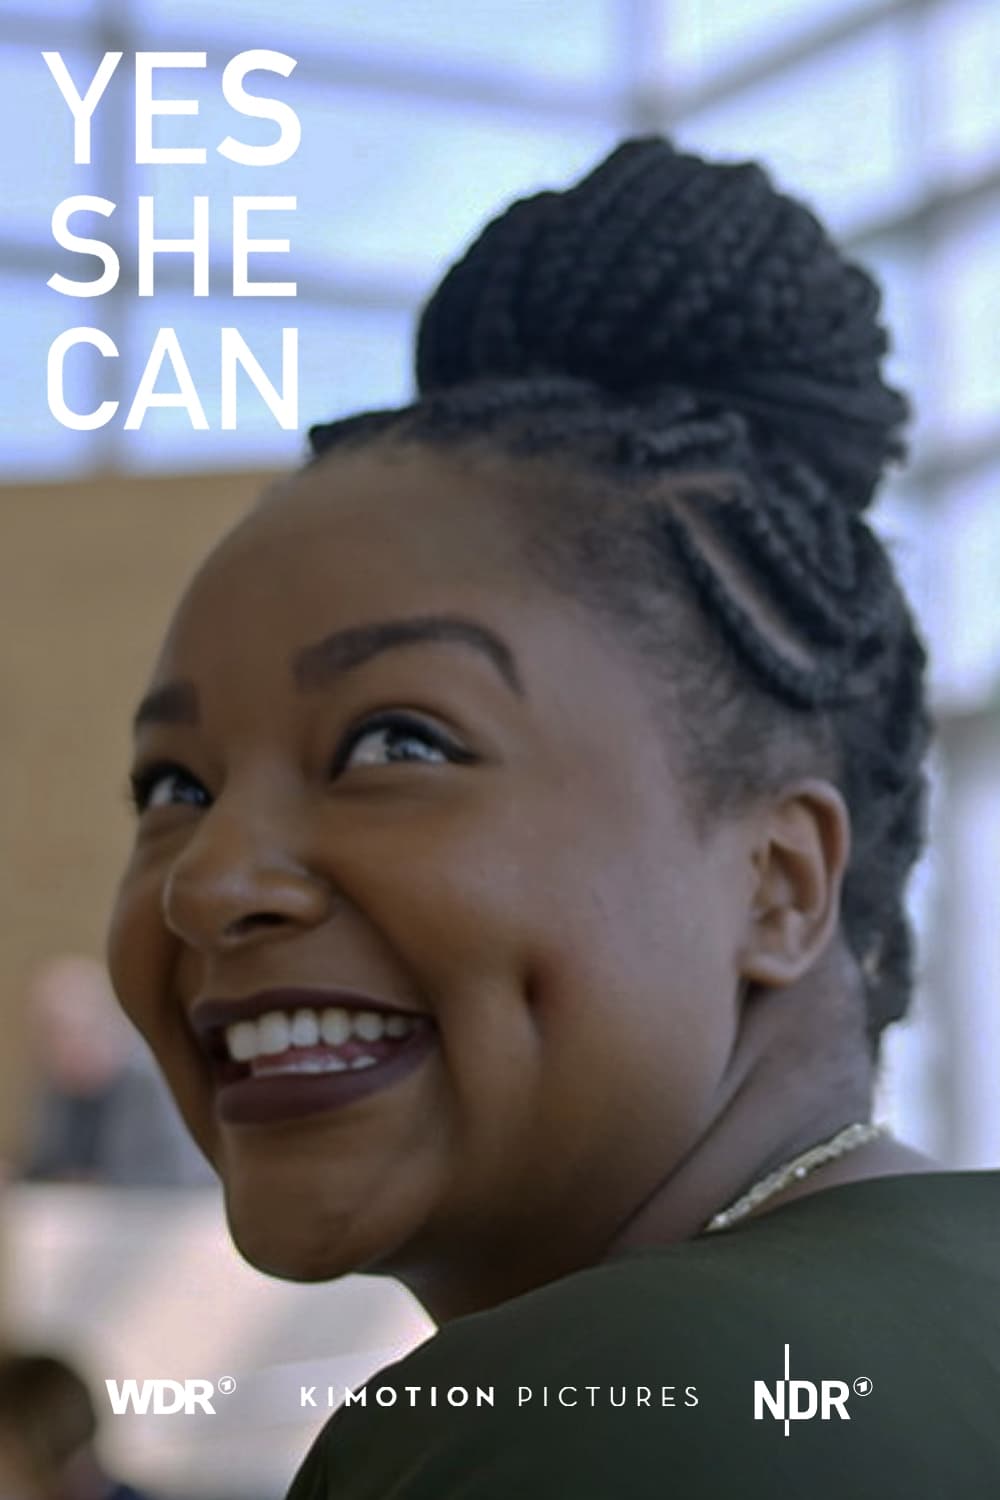 Yes She Can